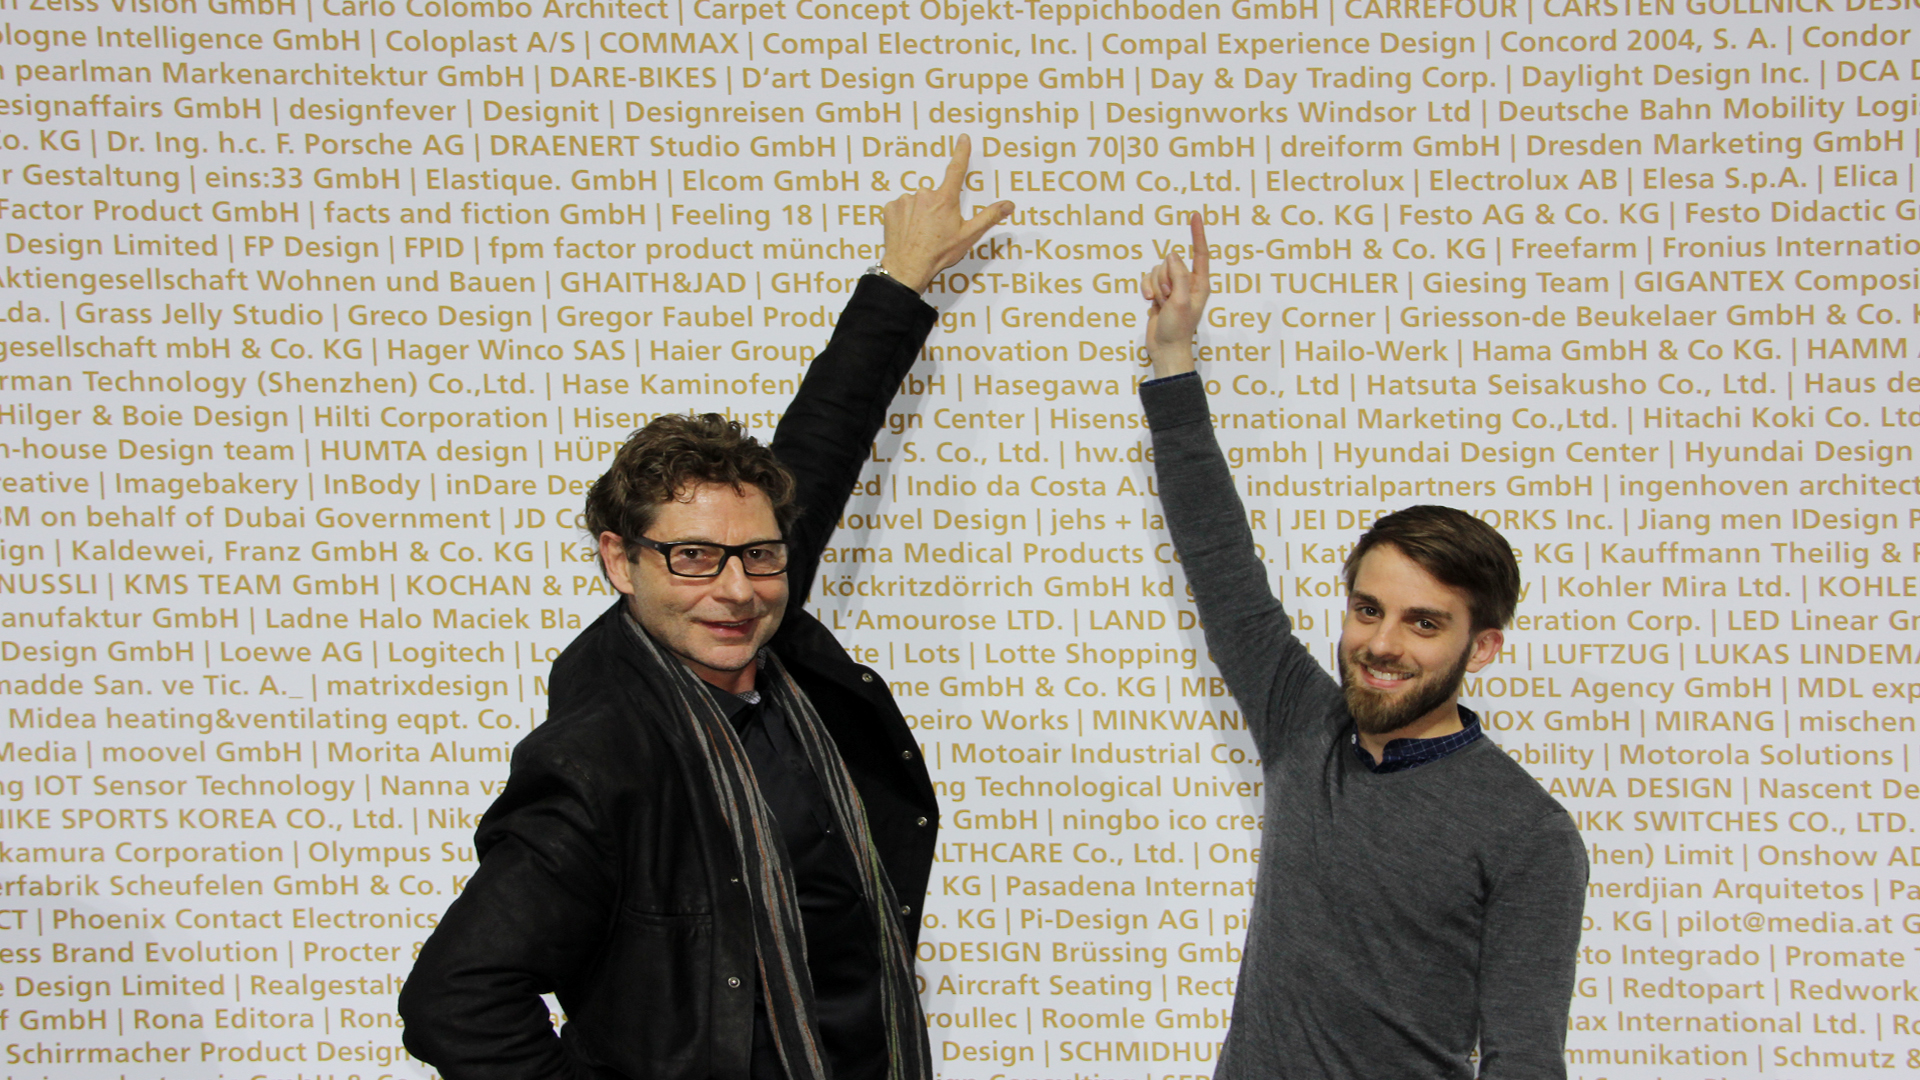 Thomas Starczewski (designer and founder) and Piero Horn from designship point to the lettering on the winner wall. The designship team of designers received two awards at the BMW Welt in Munich. BMW Welt München - Messe - iF Product Design Award 2015 - best of the best - design award - designship GmbH - Product Design - Industrial Design - Interface Design - iF world design index - Top 25 Industry - Top 100 design studios worldwide - we love design